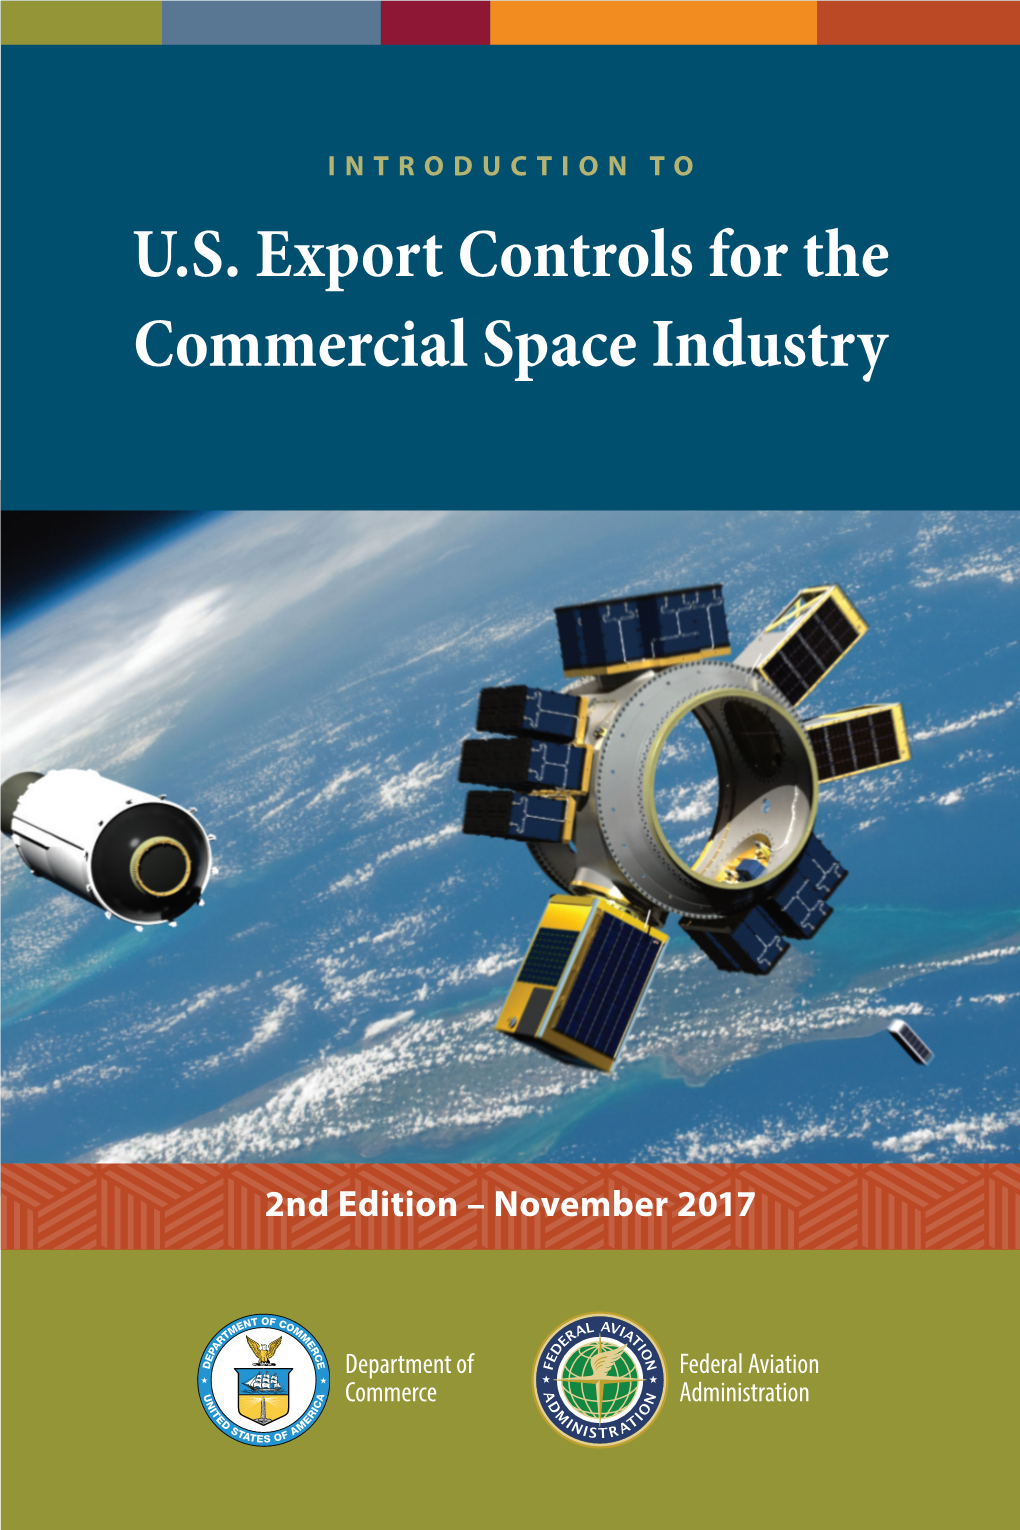 INTRODUCTION to U.S. Export Controls for the Commercial Space Industry